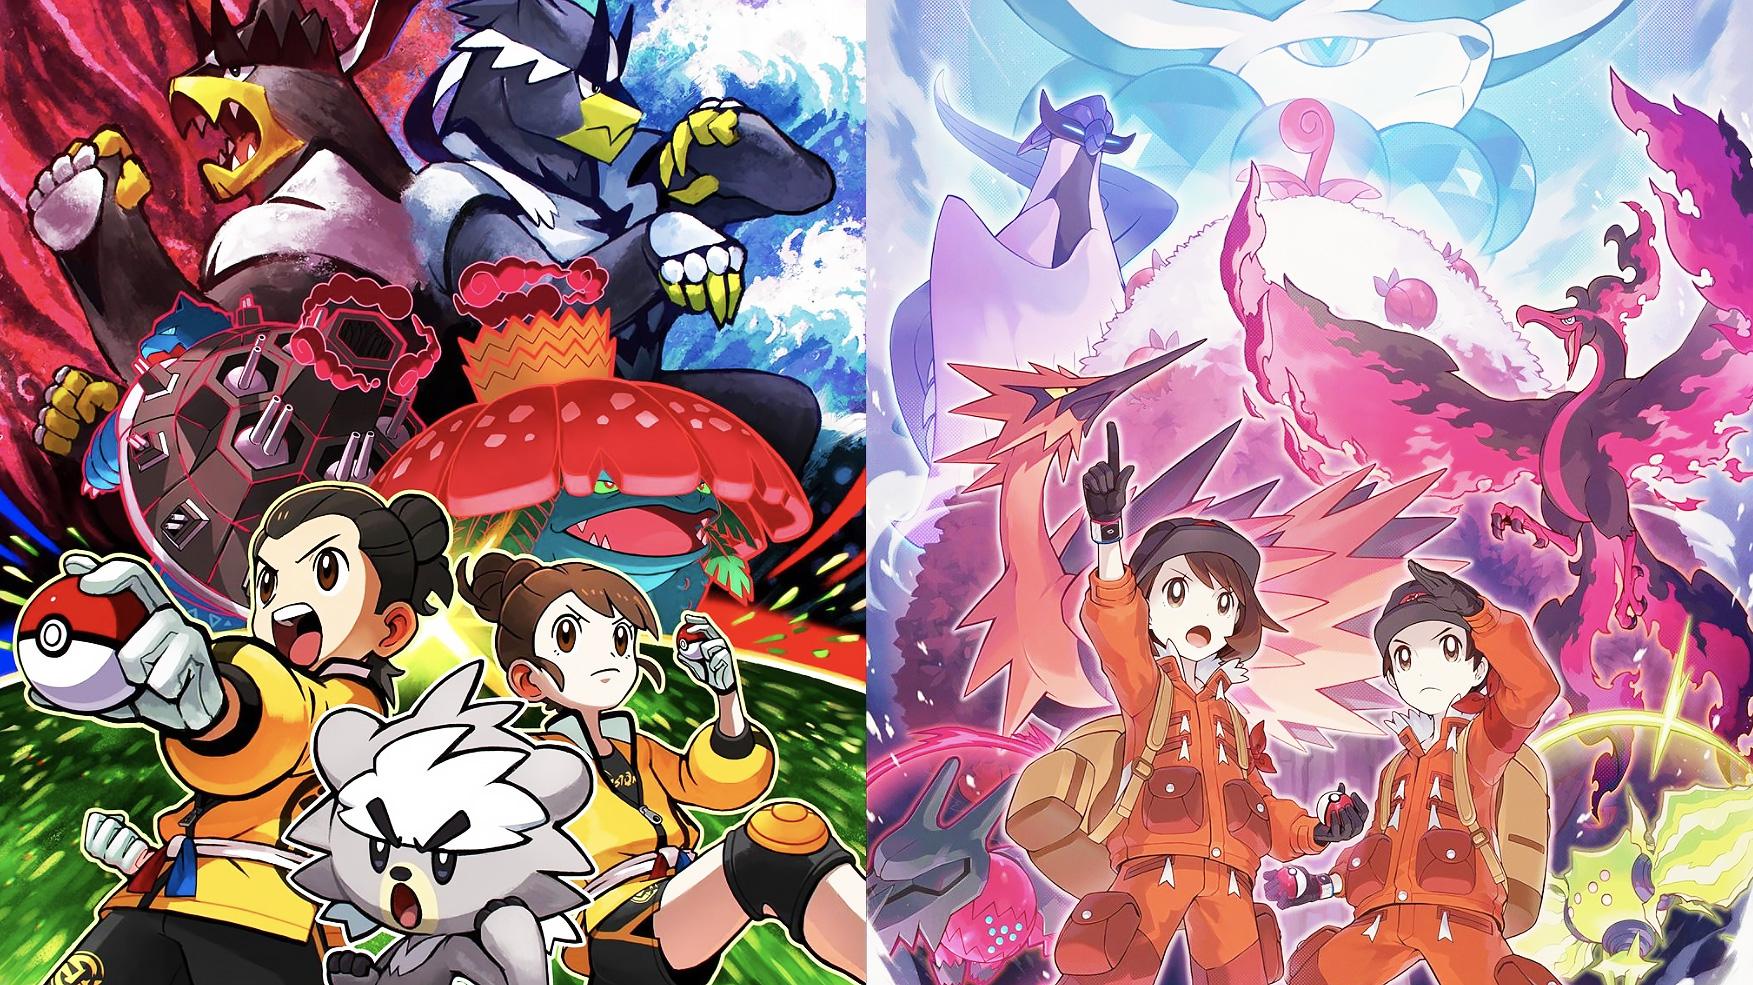 Geek Review - Pokémon Sword and Shield: The Crown Tundra DLC